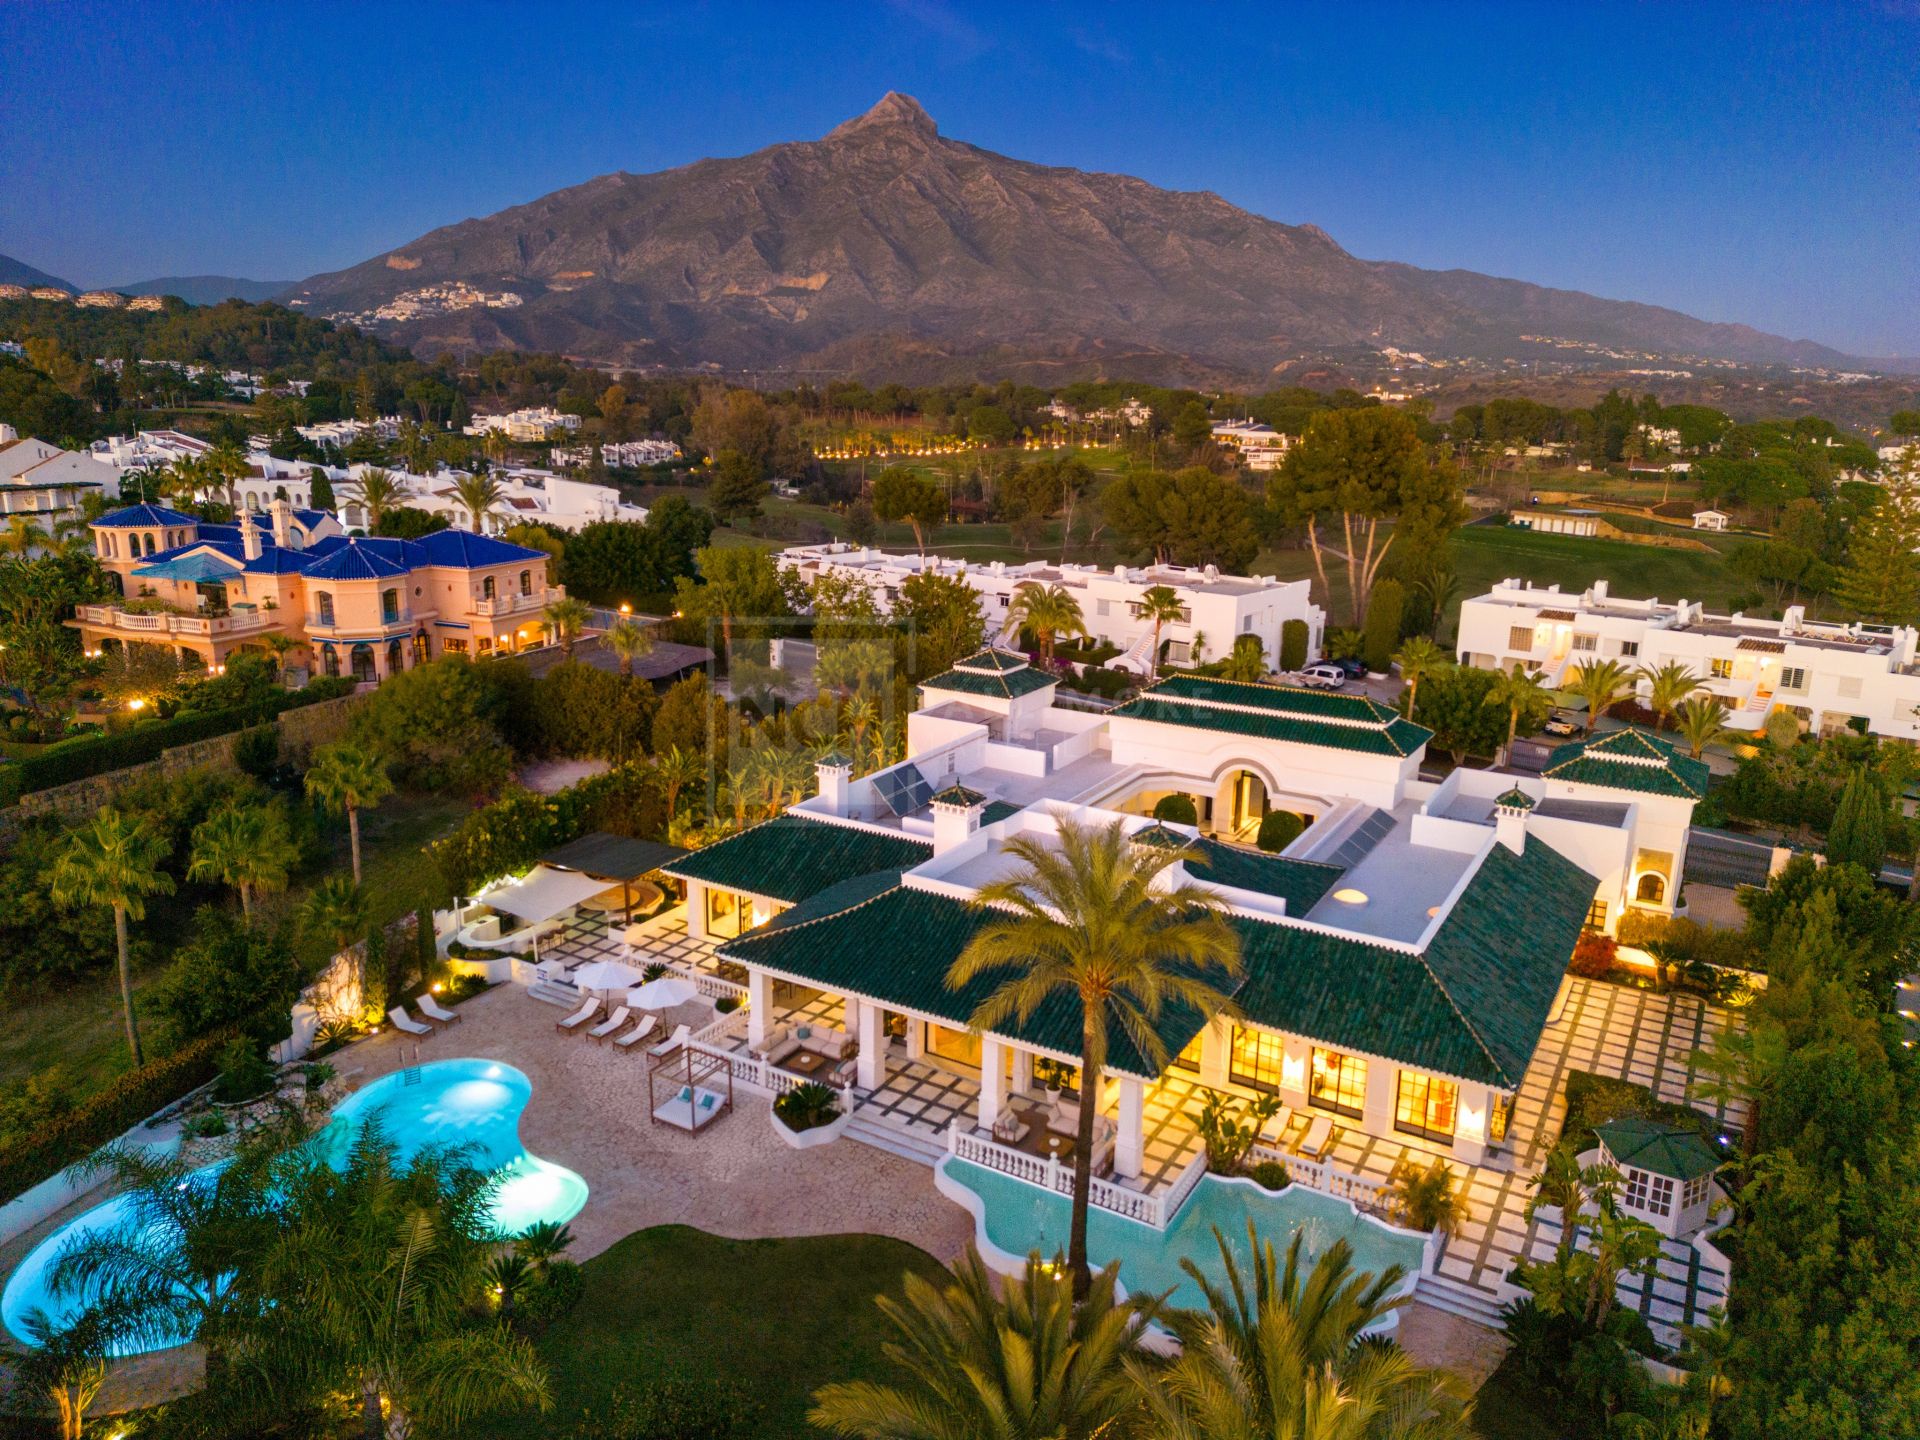 ONE-OF-A-KIND-PALACE LOCATED IN NUEVA ANDALUCIA